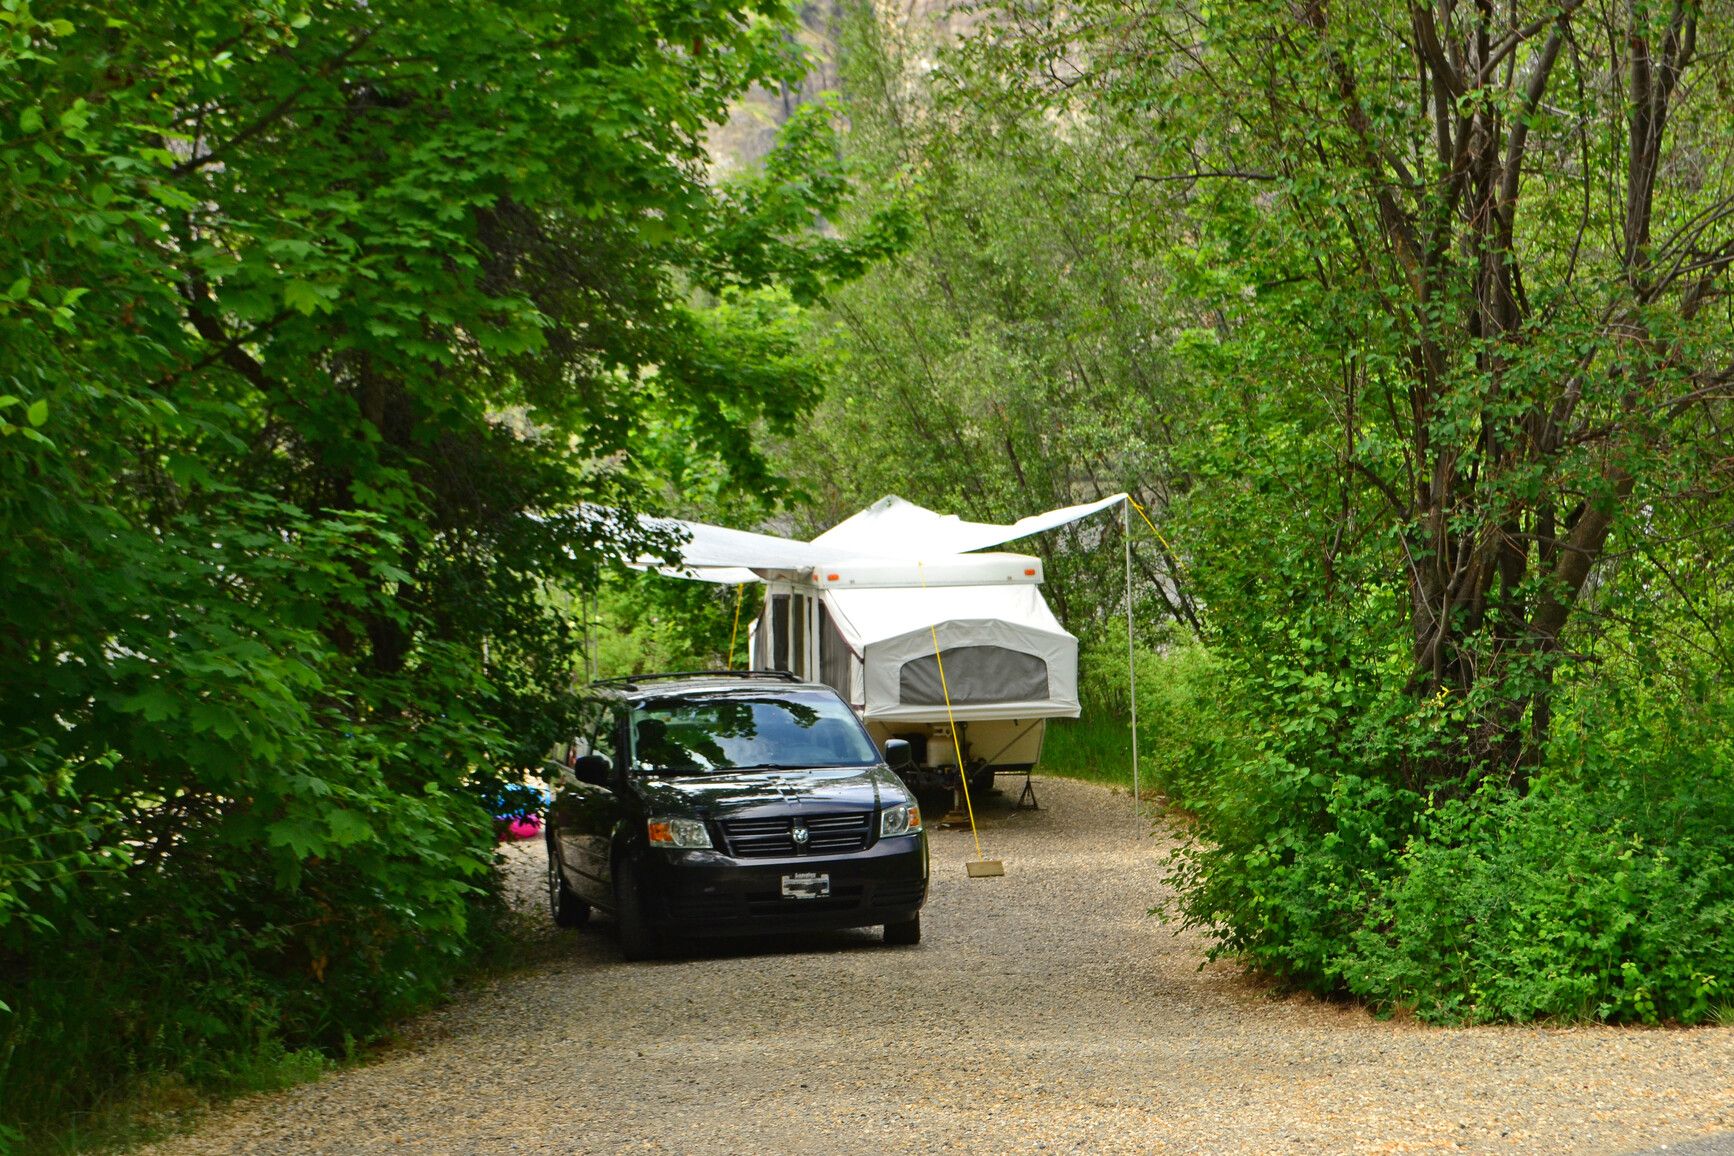 Camping in Vaseau Lake Park with large sites surrounded by forest makes for a great family holiday.